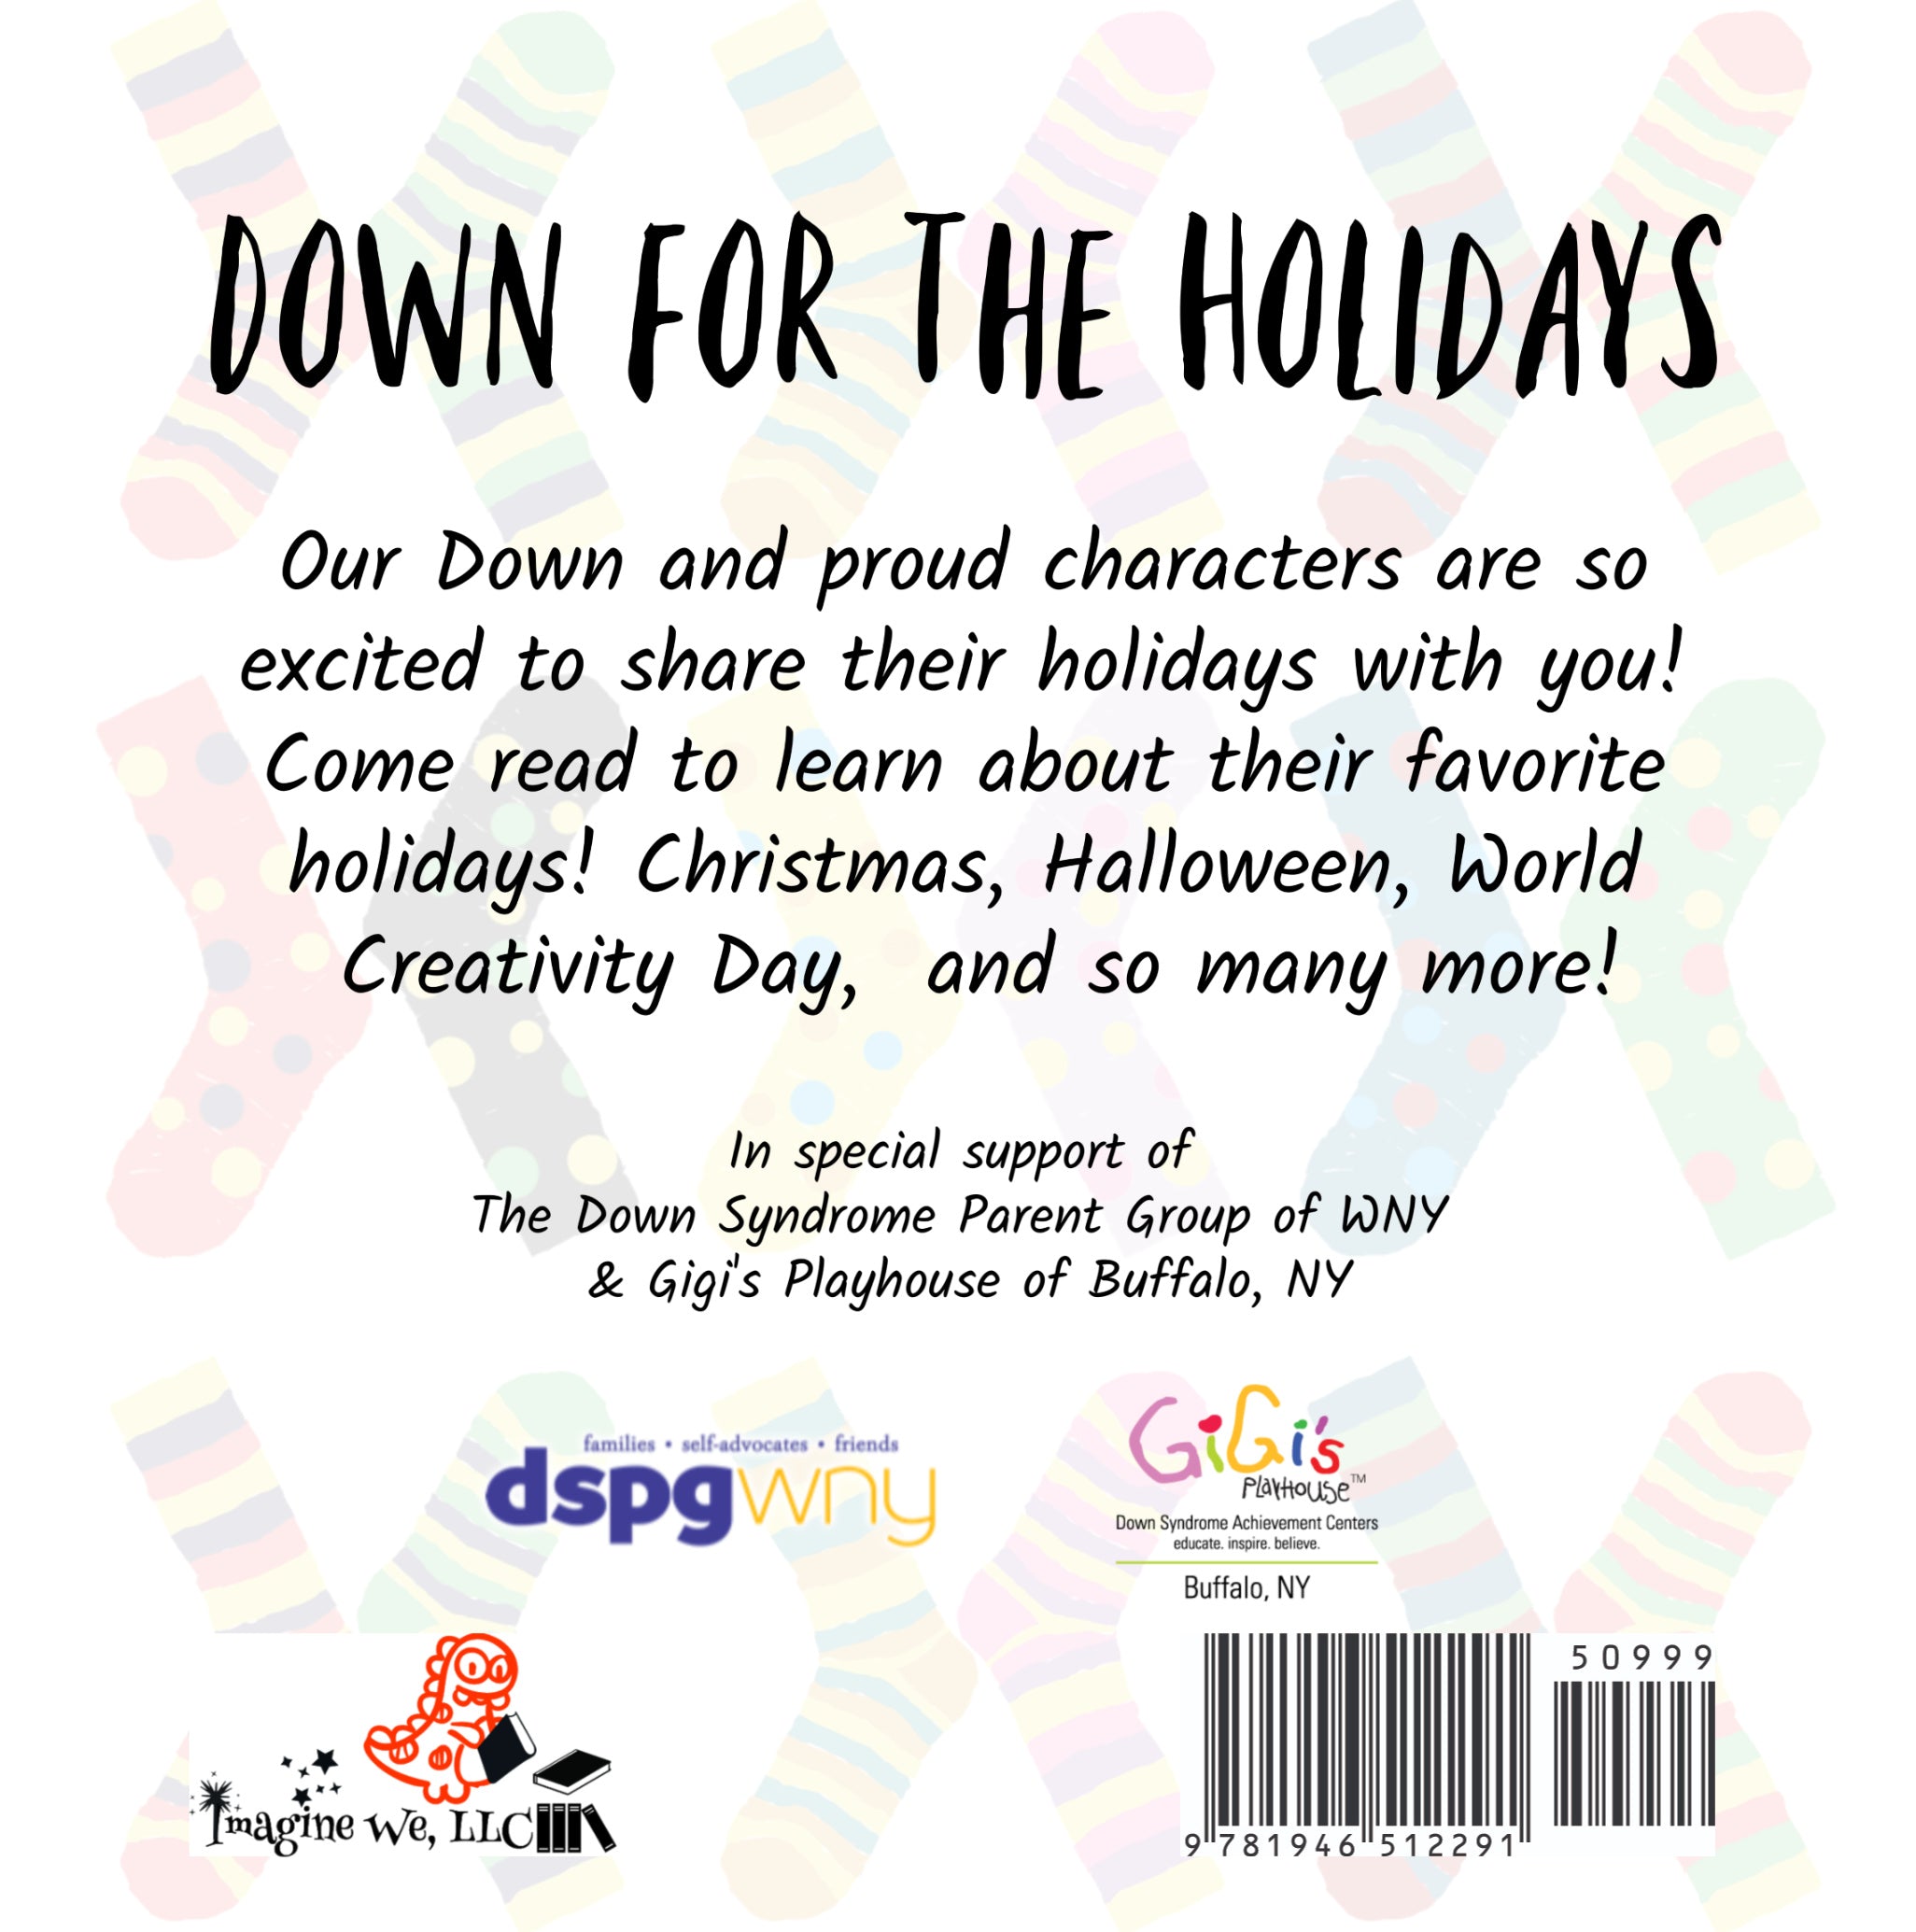 Down for the Holidays - ImagineWe Publishers